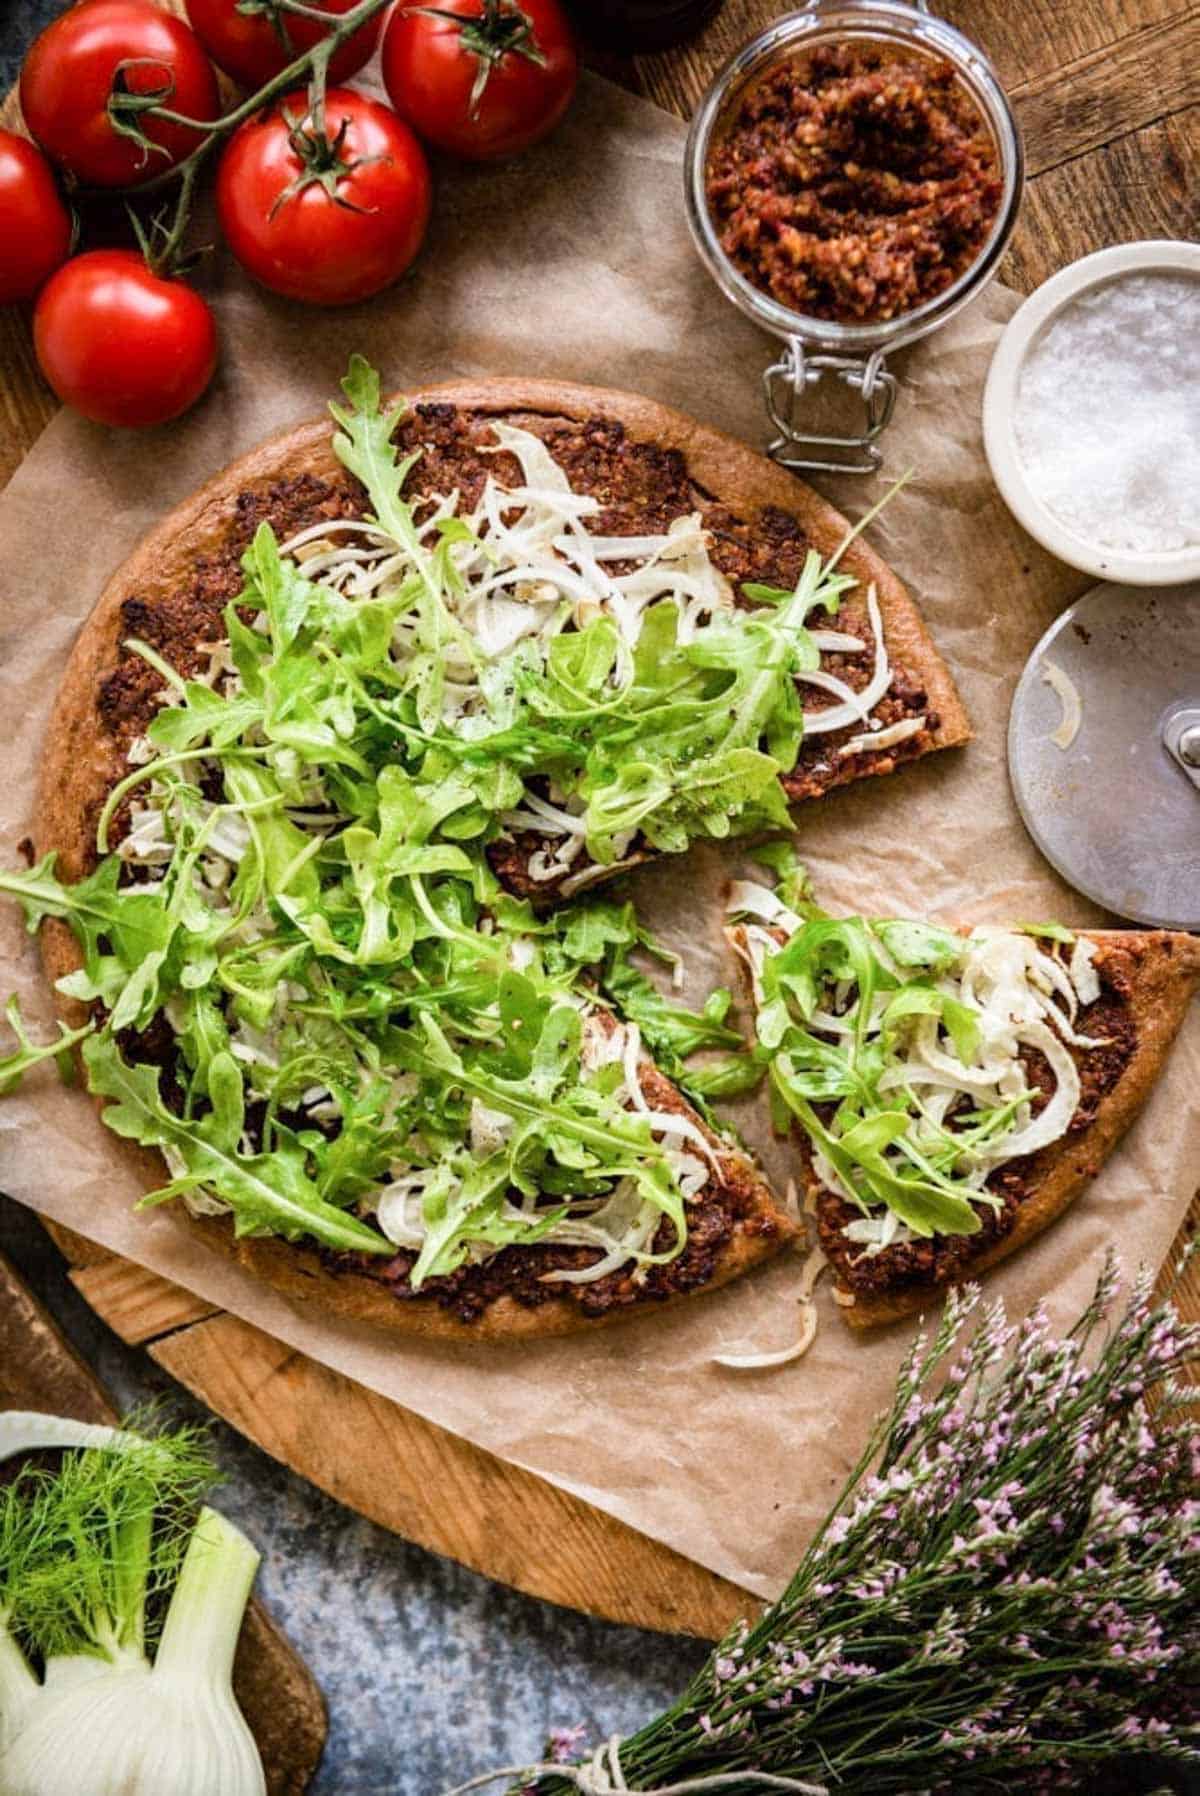 loaded pizza using a gluten-free crust and topped with sun-dried tomato pesto, arugula and fennel.